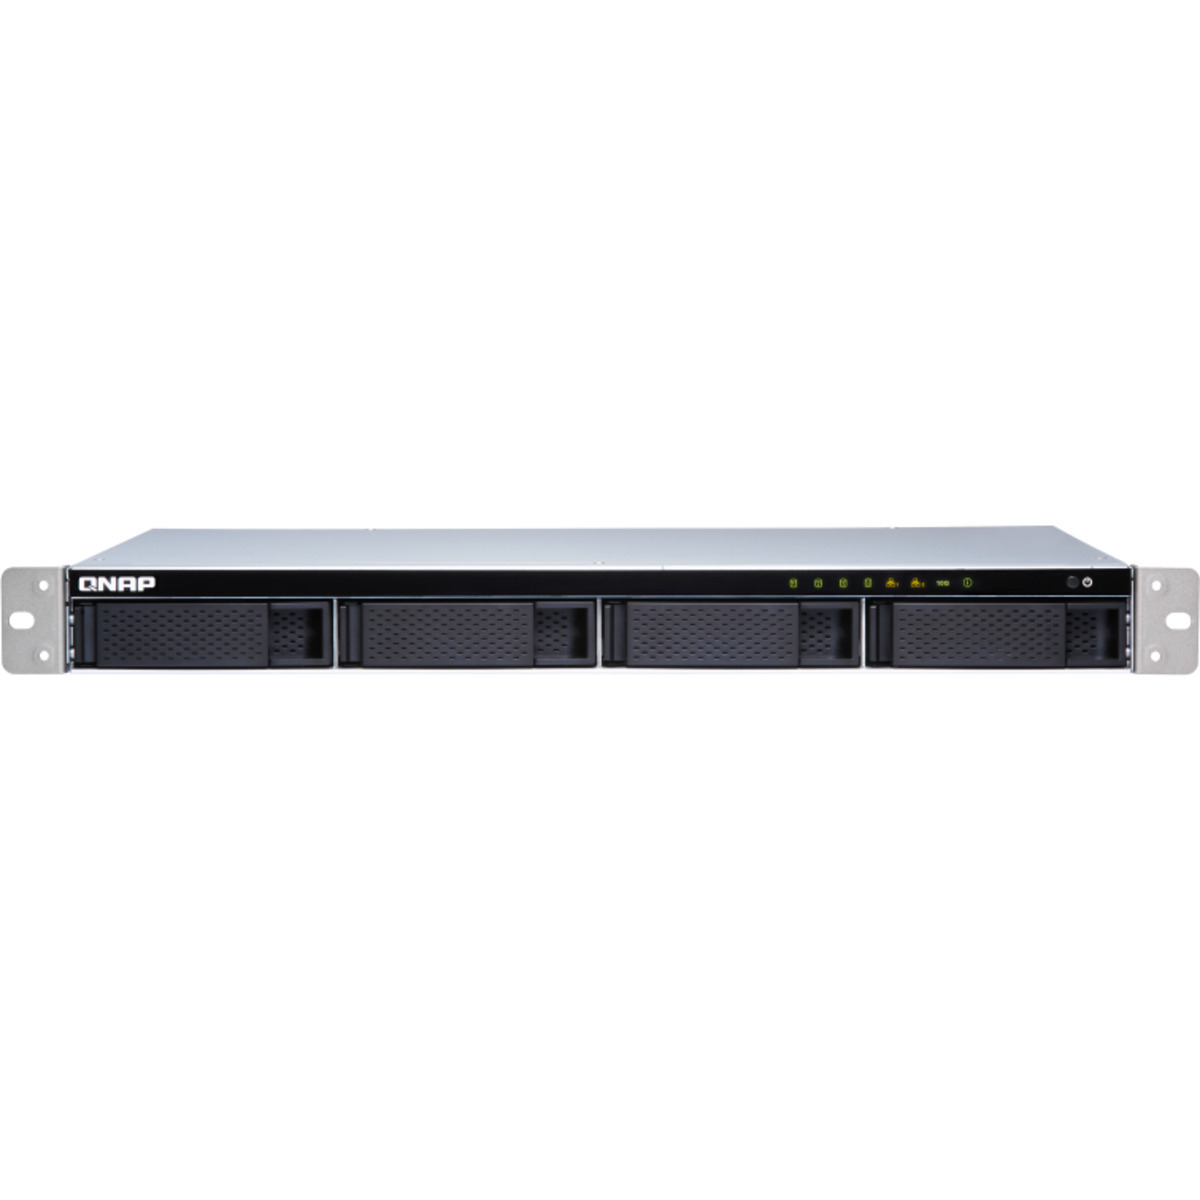 QNAP TS-431XeU 18tb 4-Bay RackMount Multimedia / Power User / Business NAS - Network Attached Storage Device 3x6tb Seagate BarraCuda ST6000DM003 3.5 5400rpm SATA 6Gb/s HDD CONSUMER Class Drives Installed - Burn-In Tested - FREE RAM UPGRADE TS-431XeU